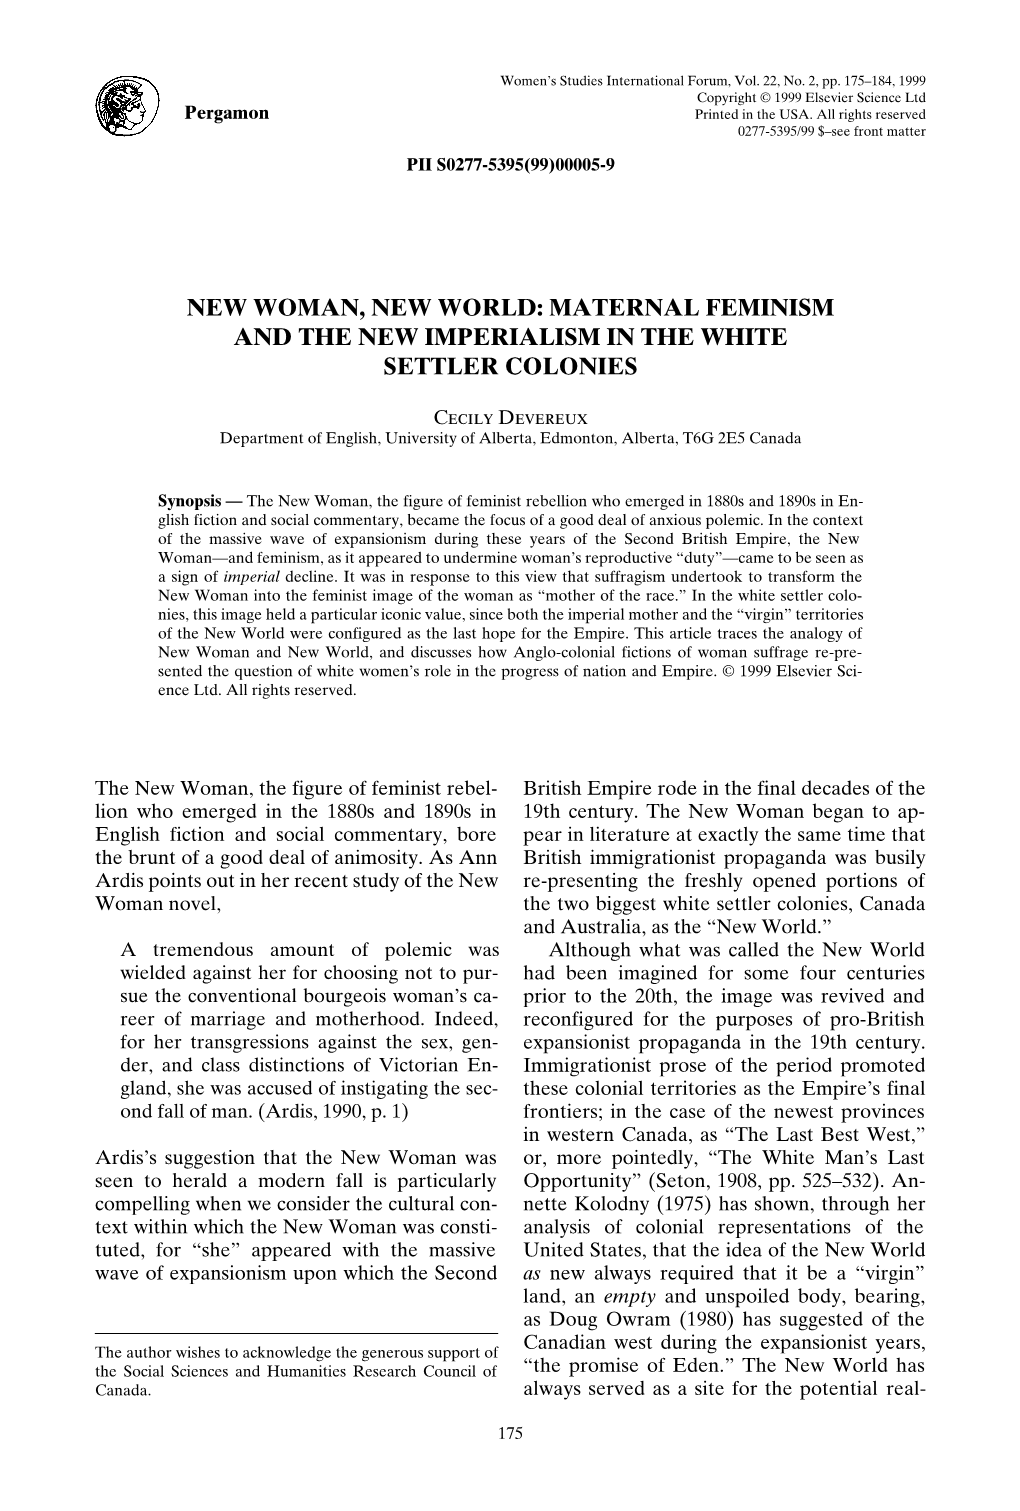 New Woman, New World: Maternal Feminism and the New Imperialism in the White Settler Colonies